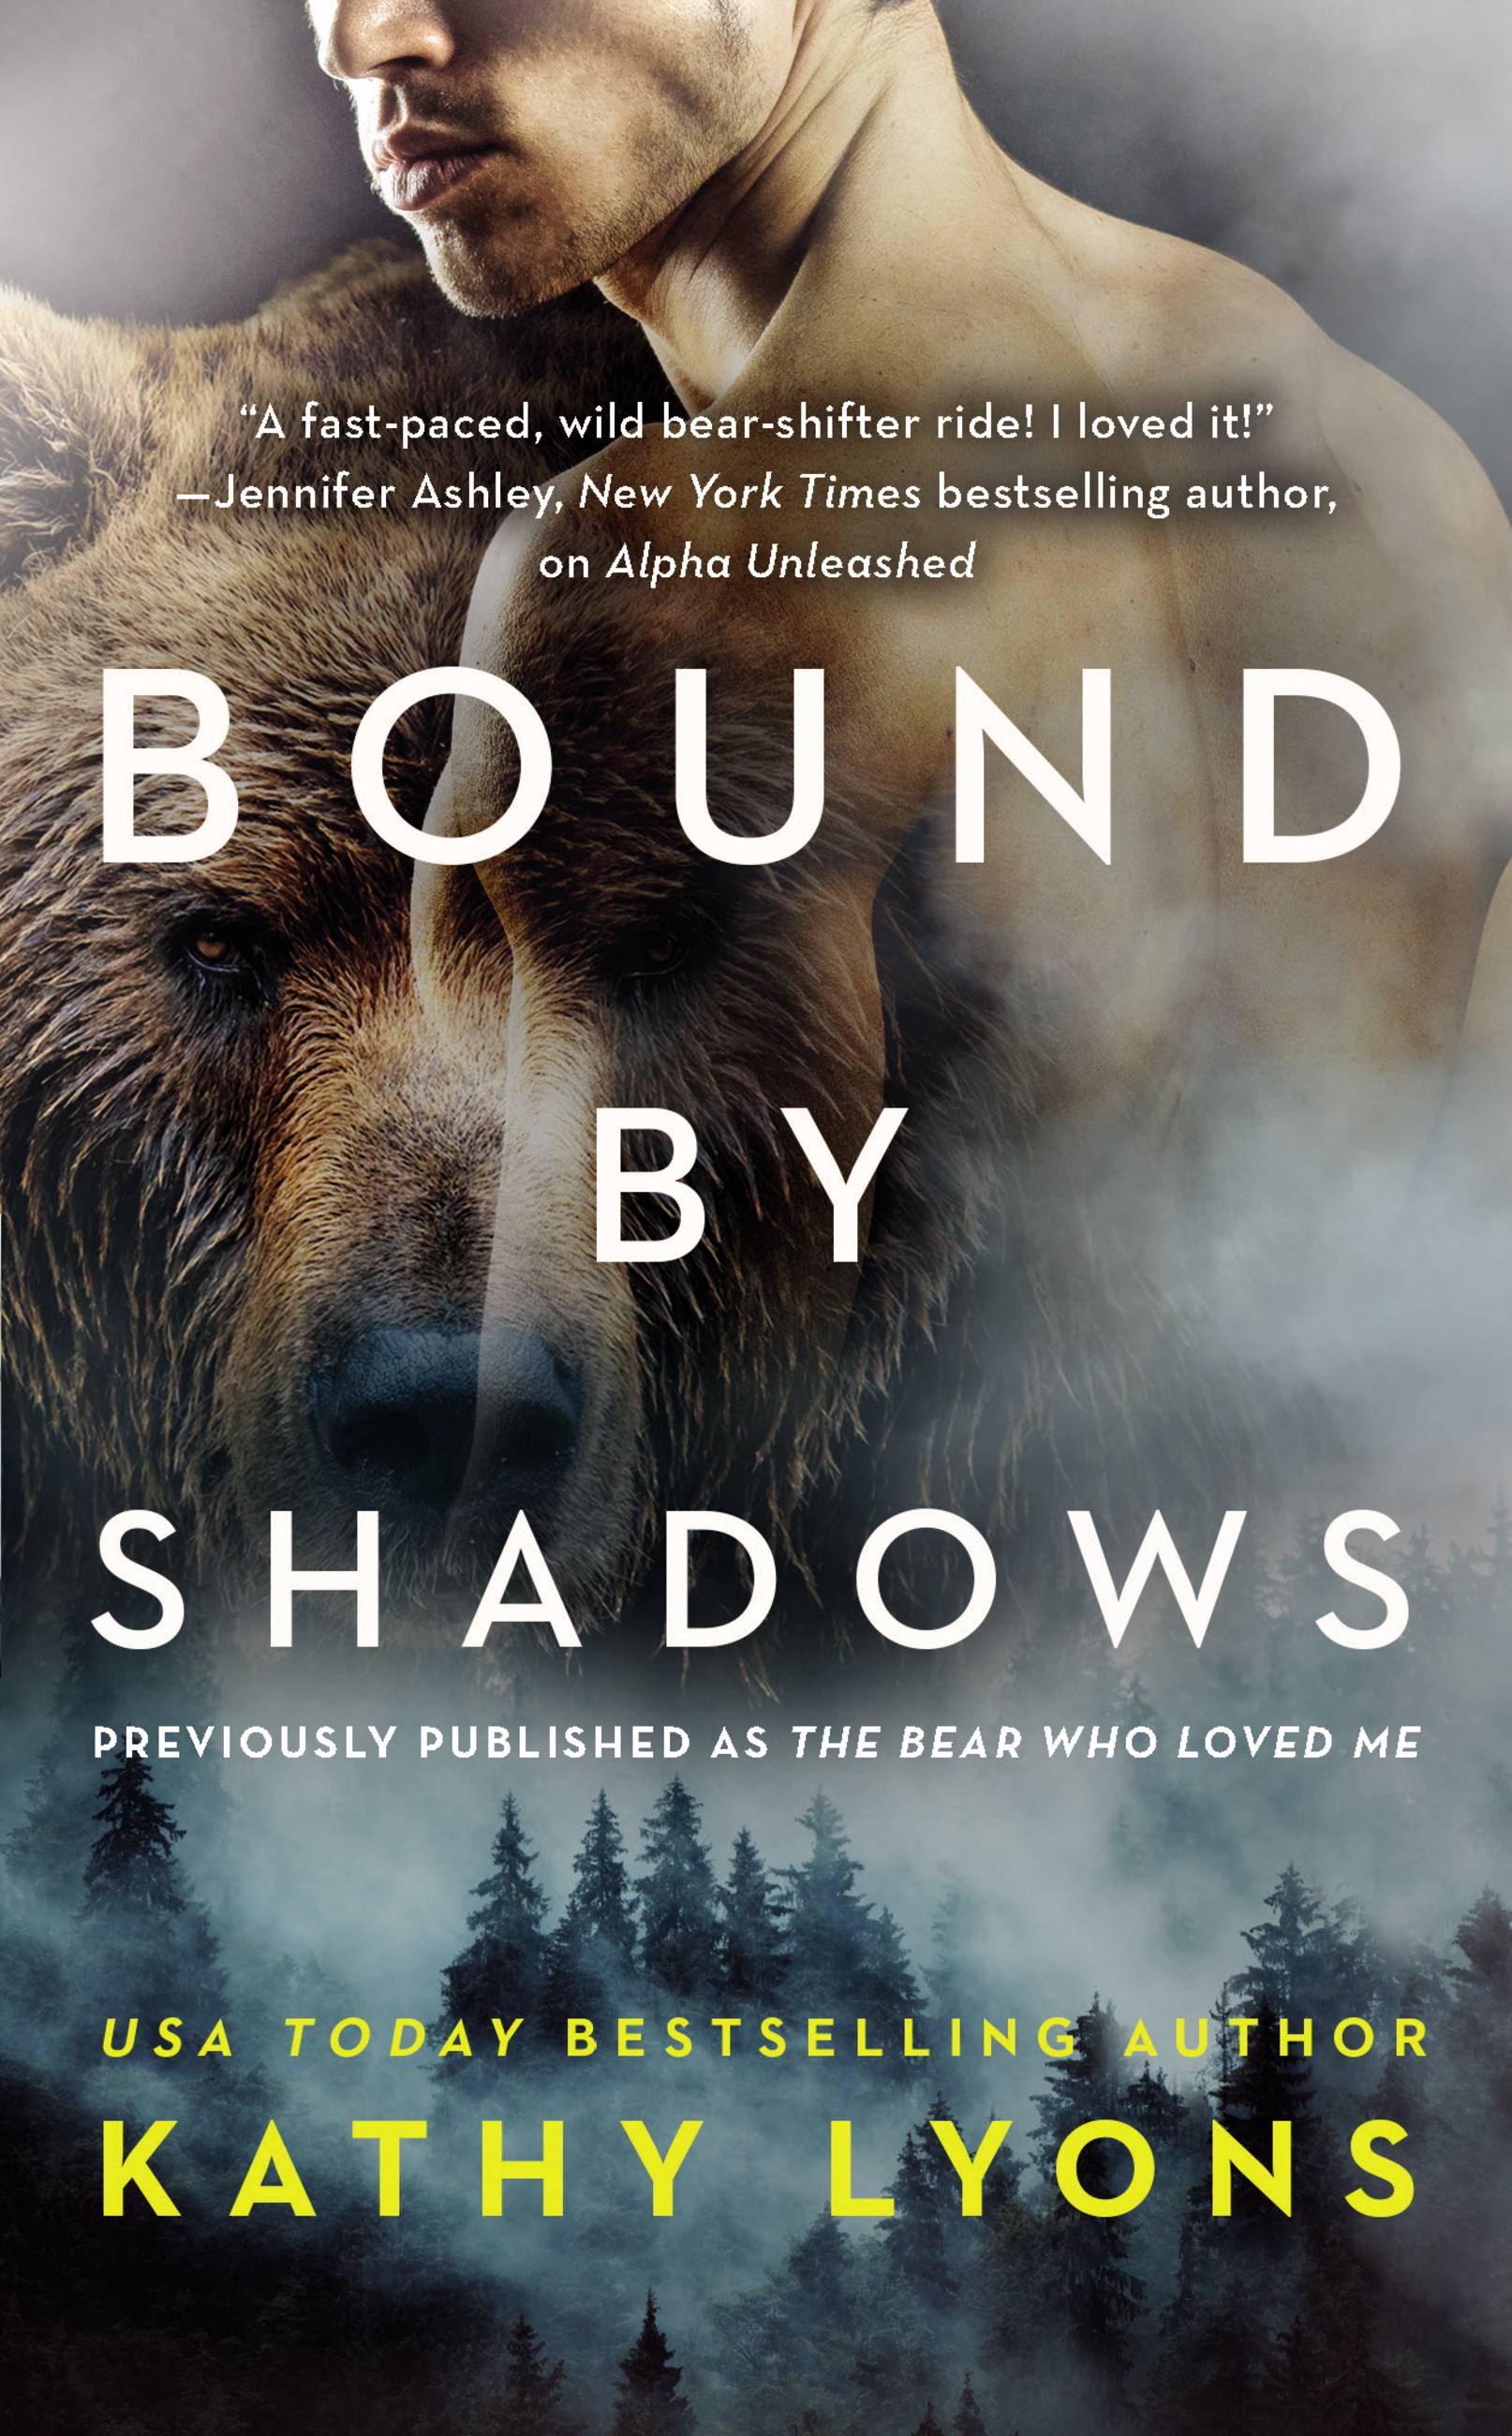 Bound by Shadows (previously published as The Bear Who Loved Me) by Kathy Lyons Hachette Book Group image photo